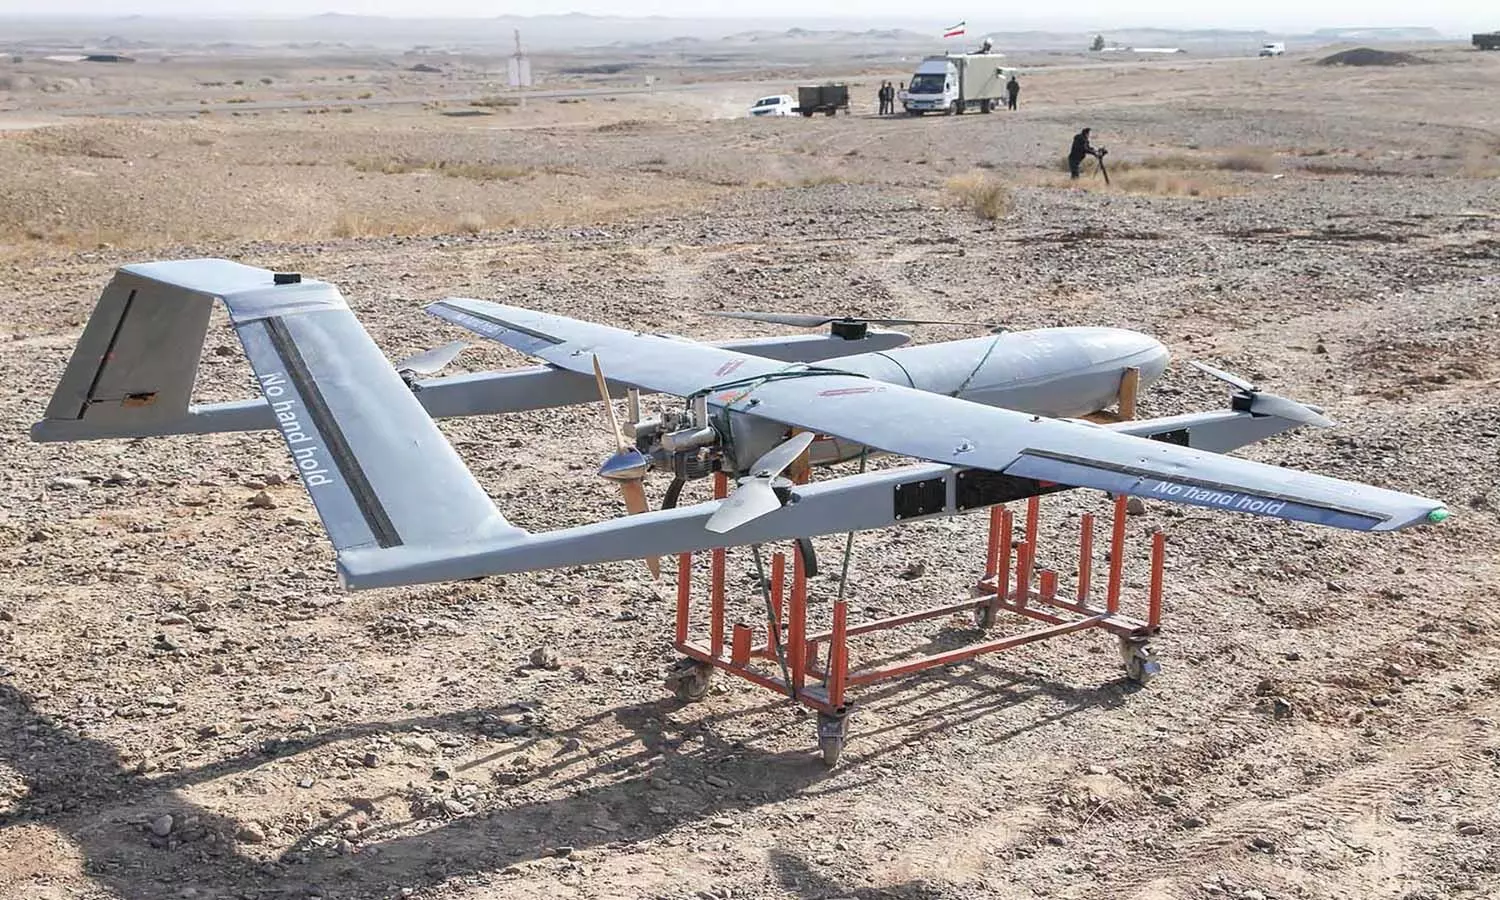 Iran showed its drone power to the world for the first time, what is its purpose